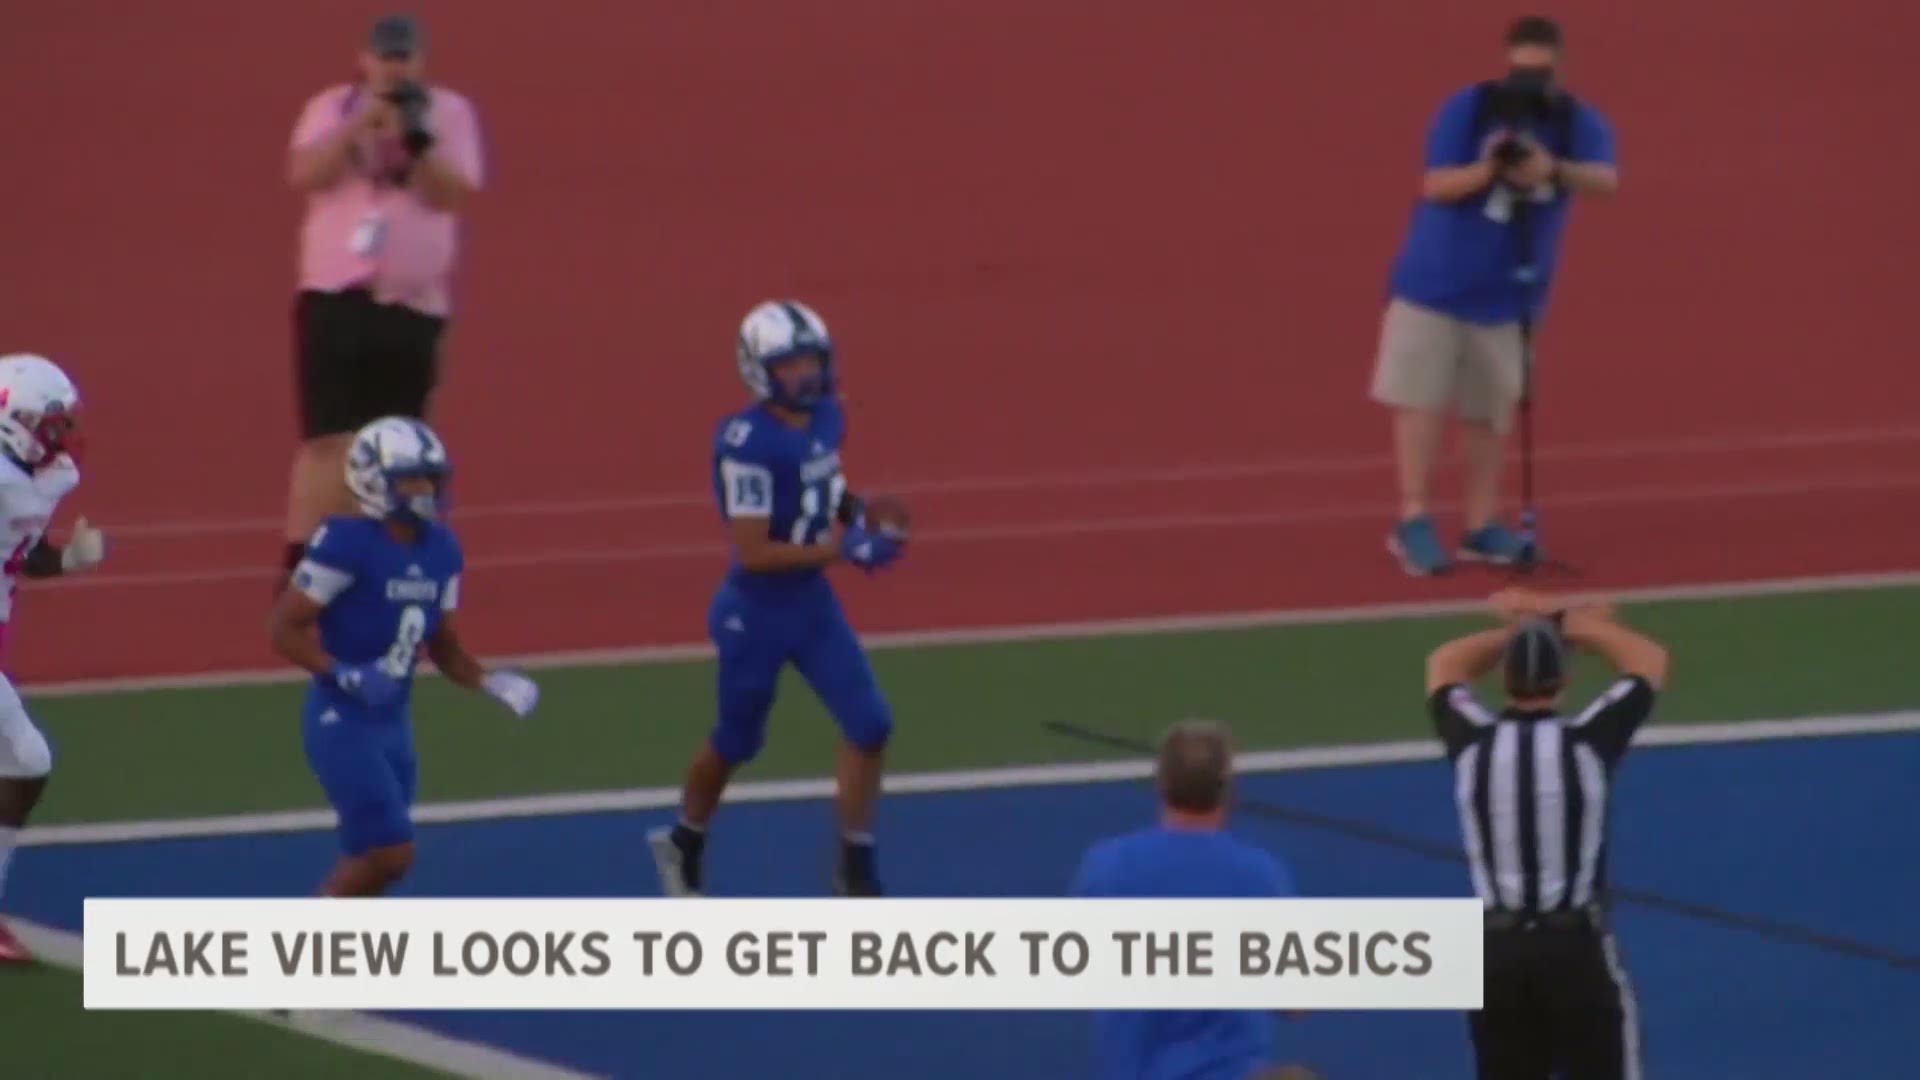 Lake View is coming off their worst loss of the season so they're hoping the bye week will help.